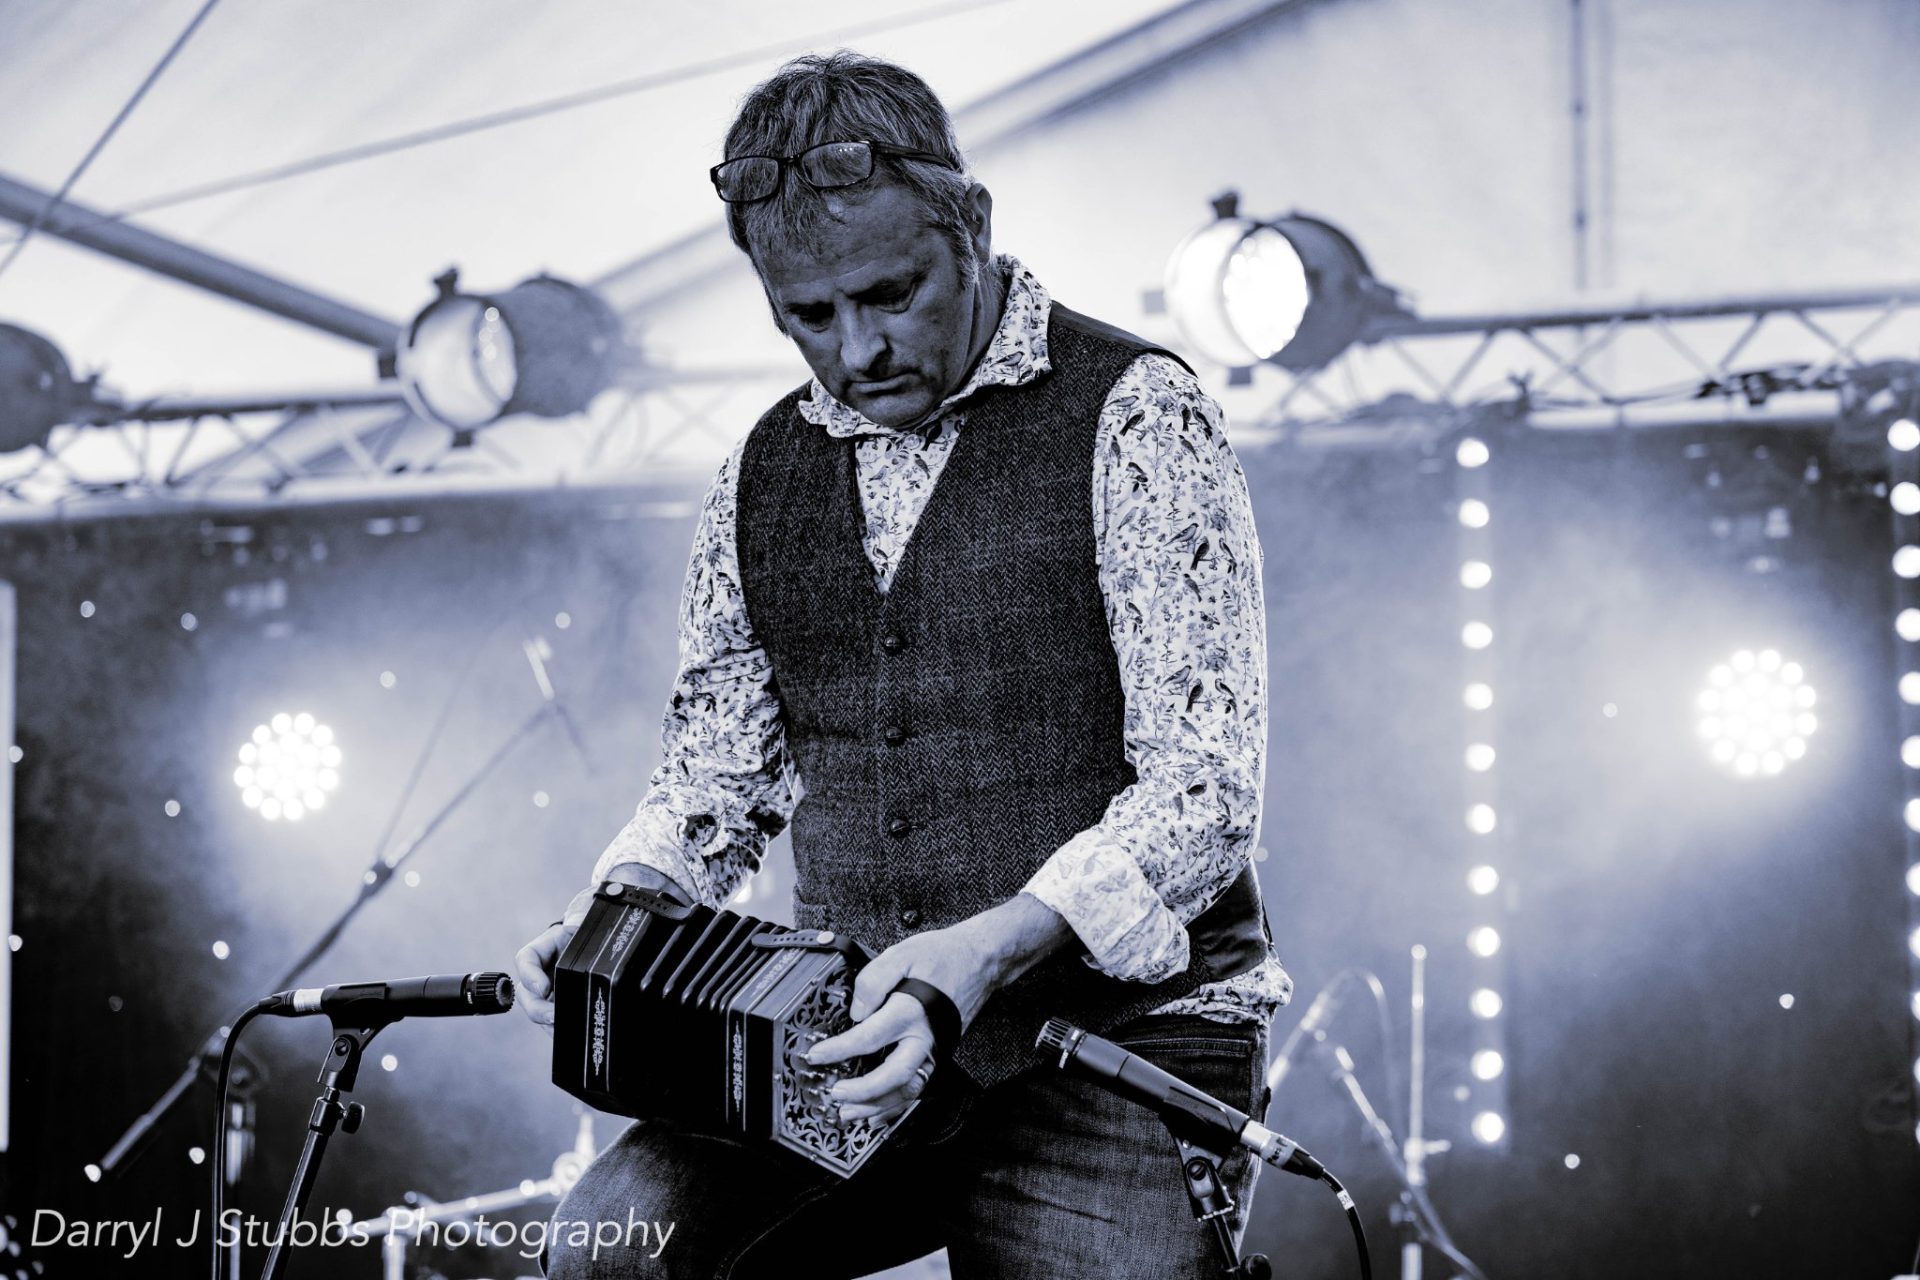 Christian Mayne plays Concertina with the Freedom Fields Ceilidh Band